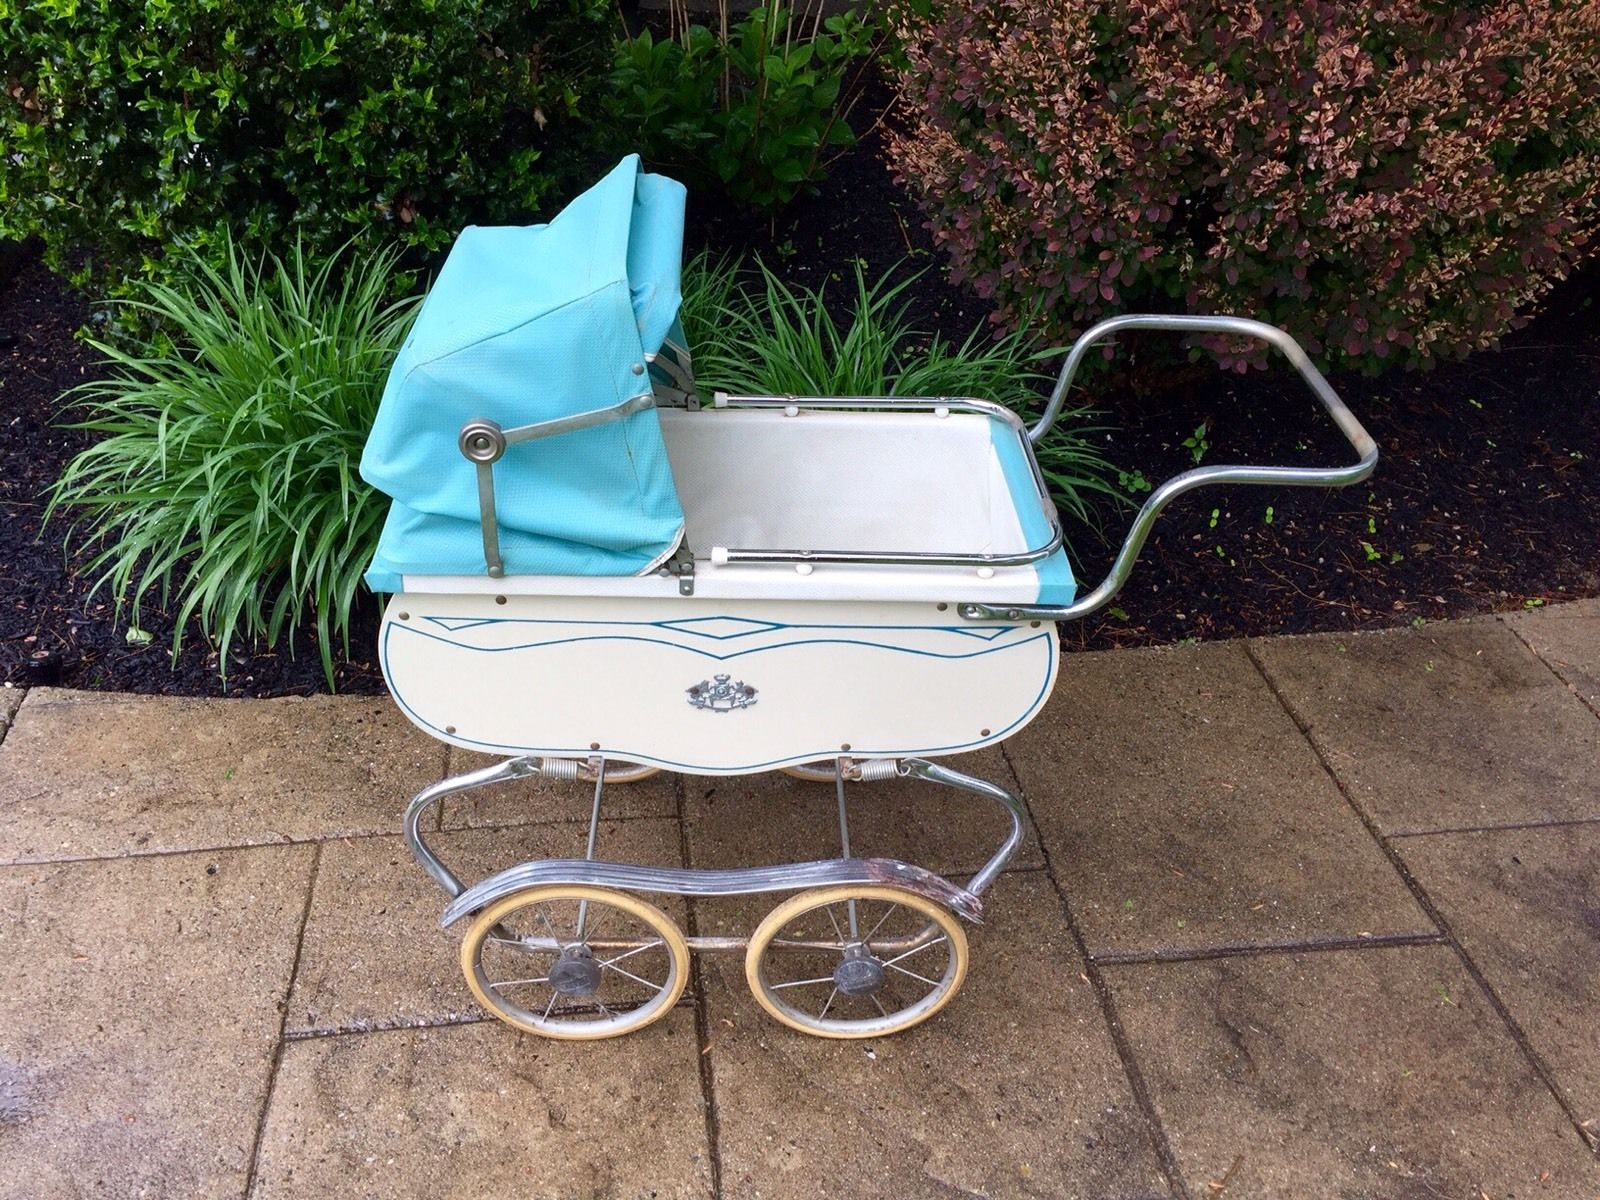 VINTAGE 1950s CORONET BABY DOLL BUGGY CARRIAGE PRAM